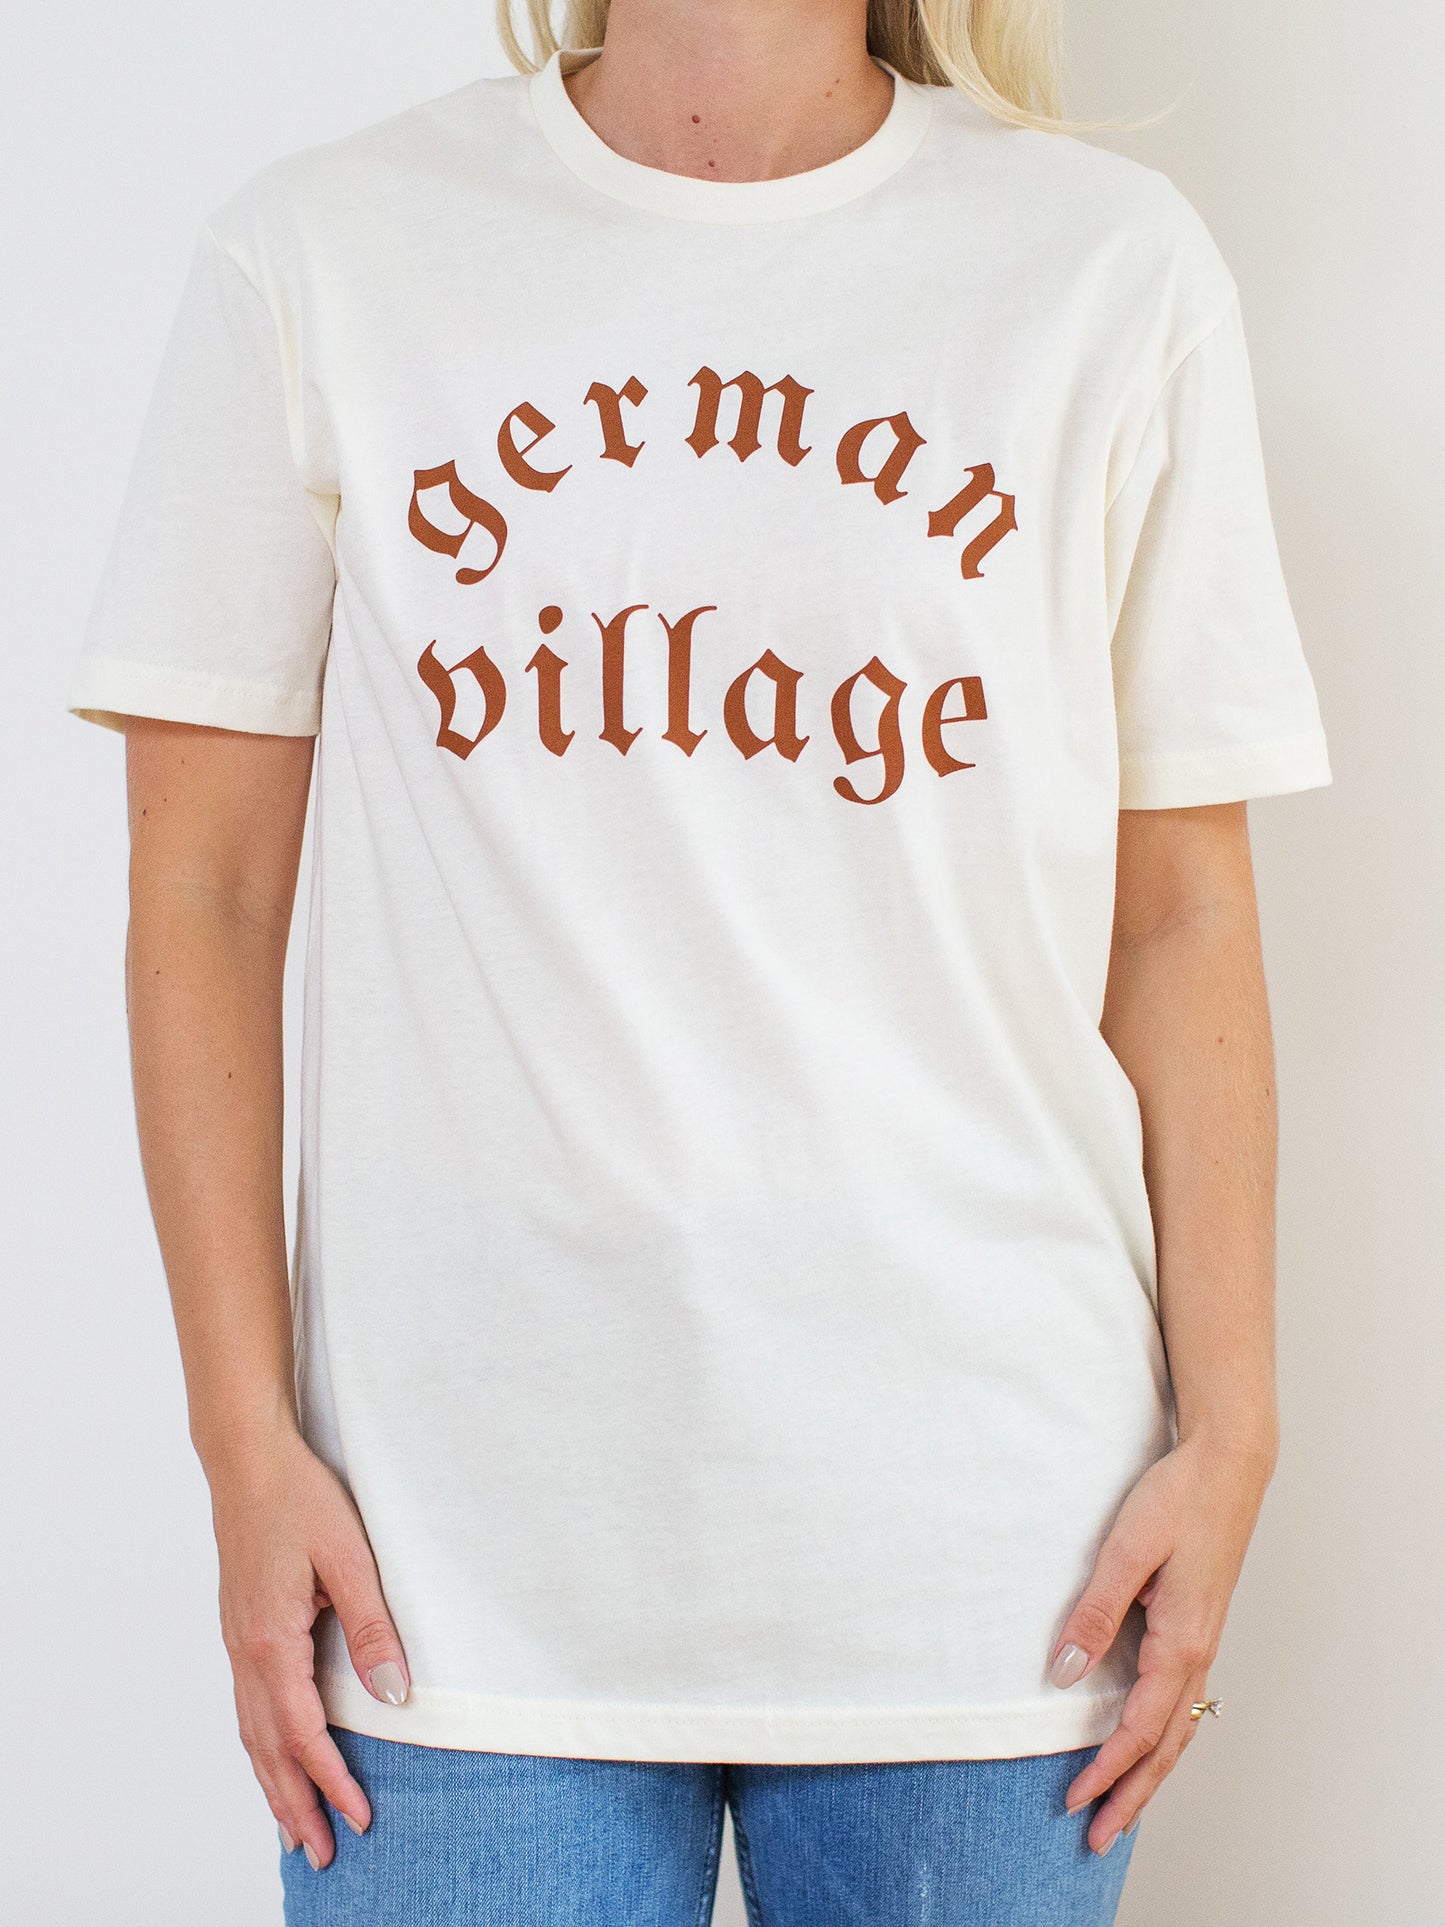 Model wearing cream colored cotton crewneck tee with German Village graphic at front